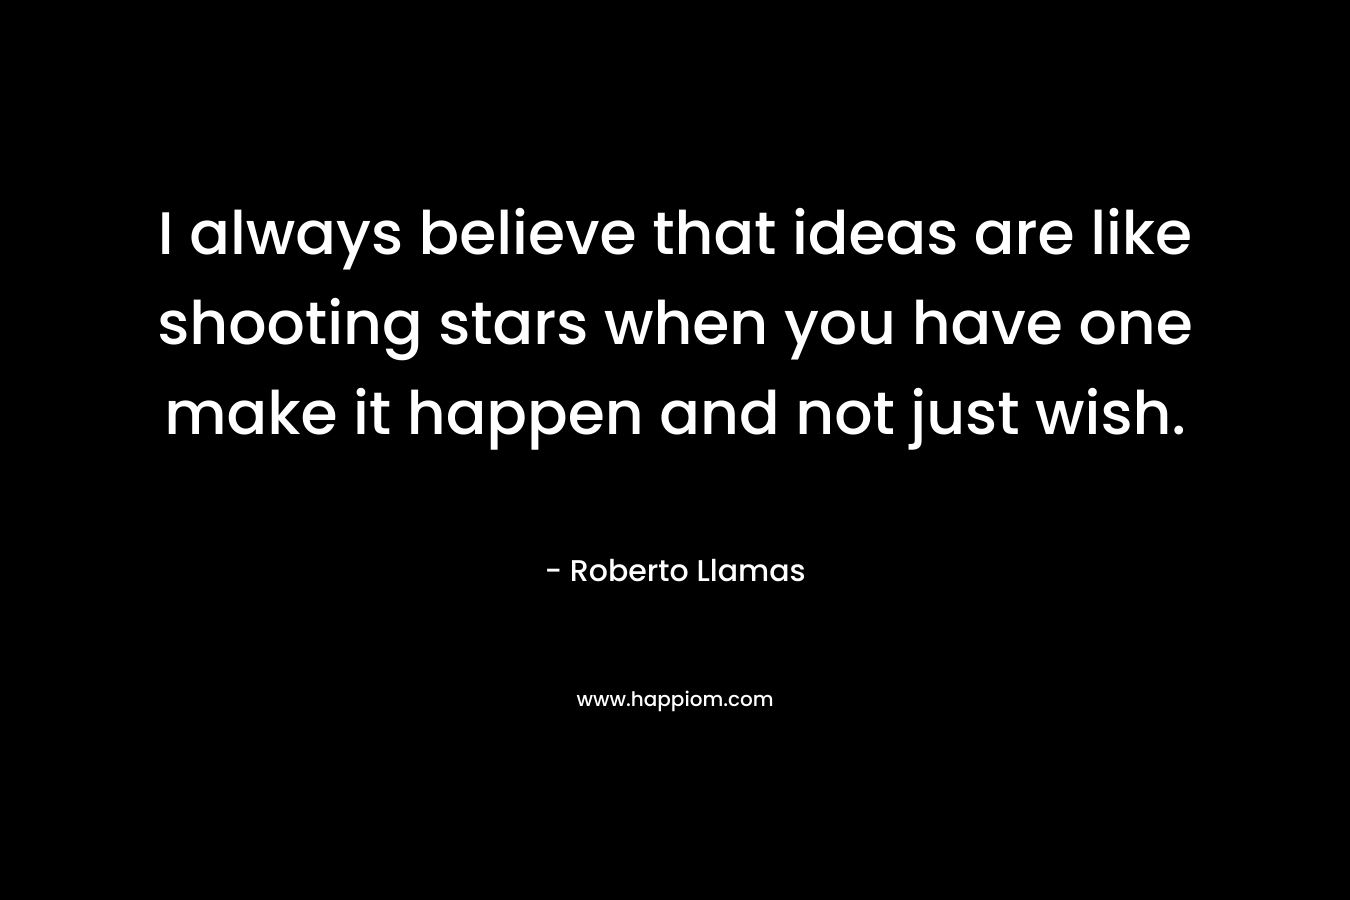 I always believe that ideas are like shooting stars when you have one make it happen and not just wish.